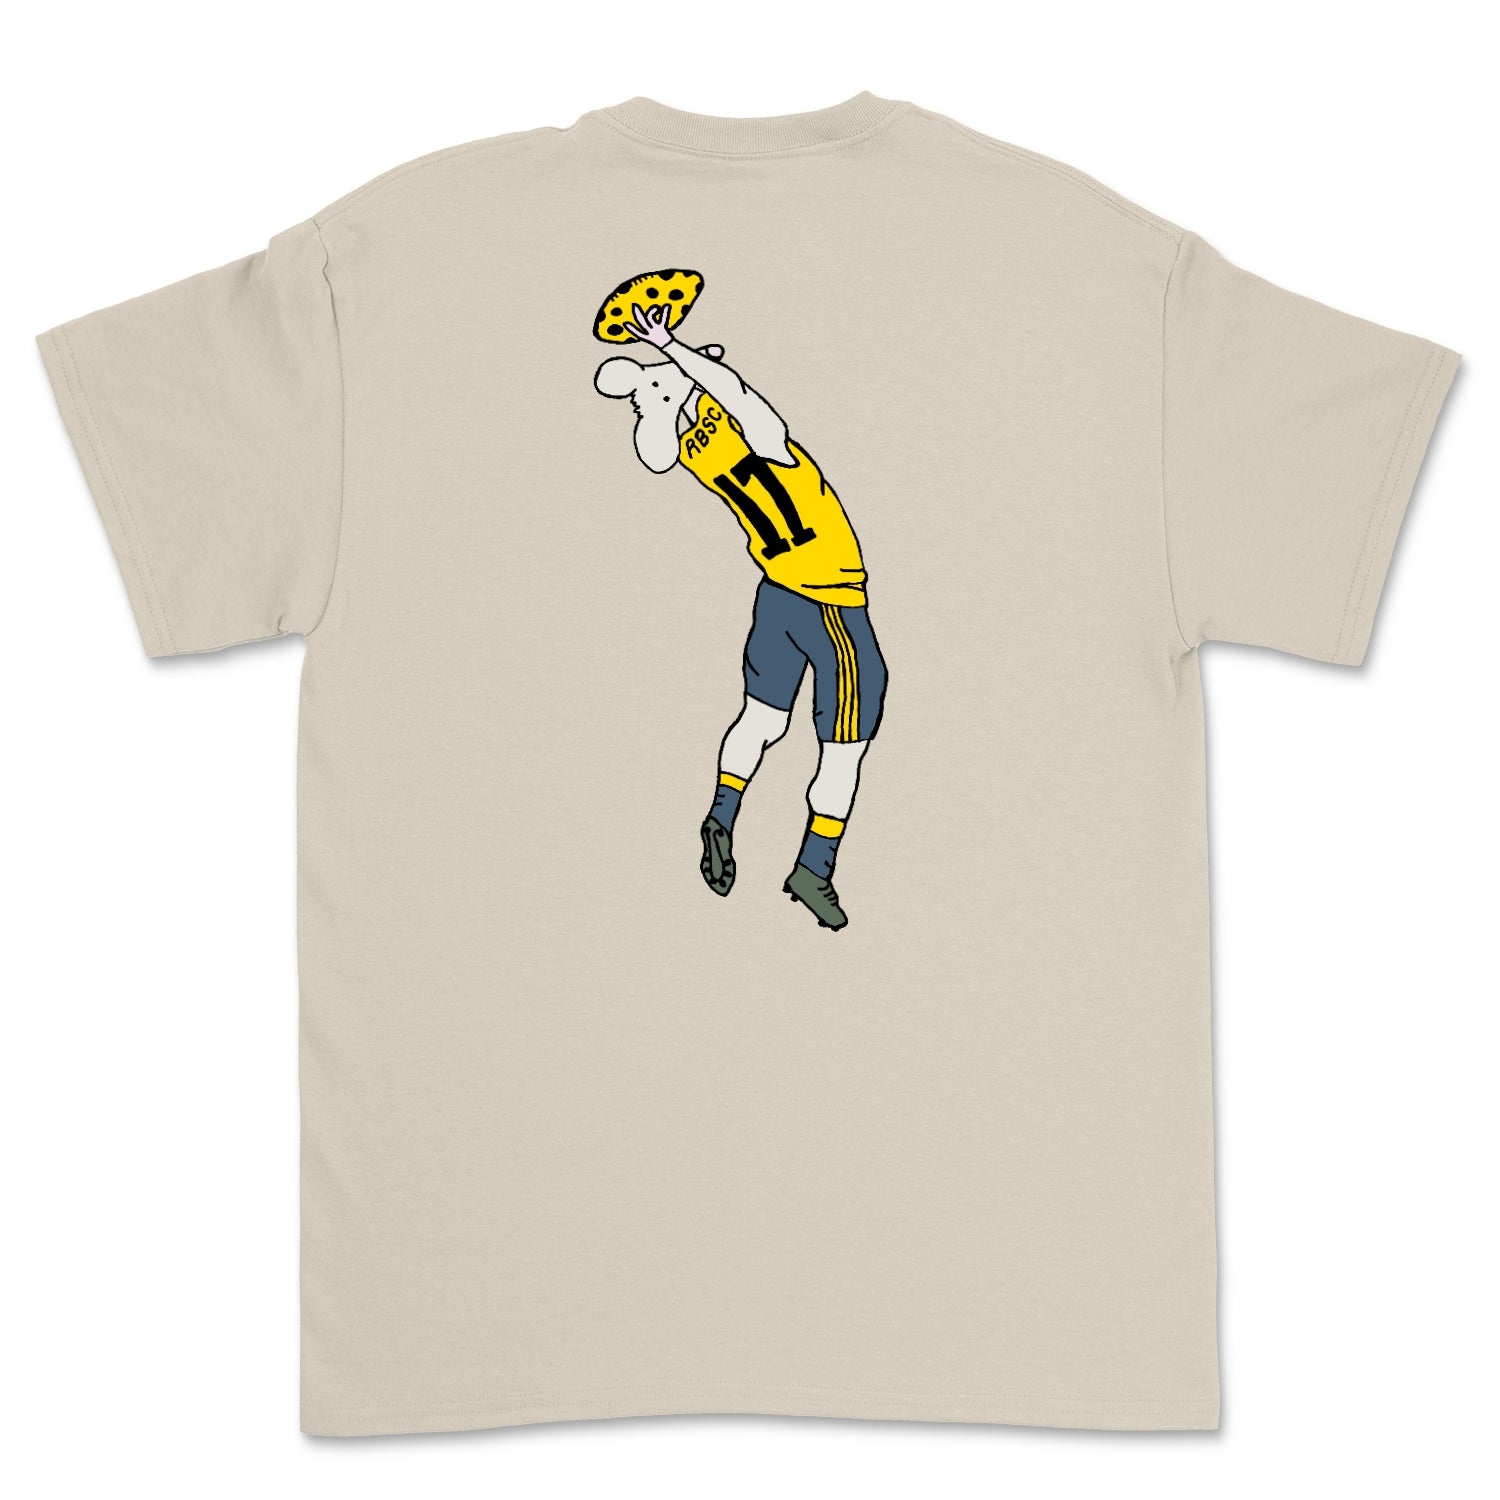 The Catch Graphic Tee Shirt